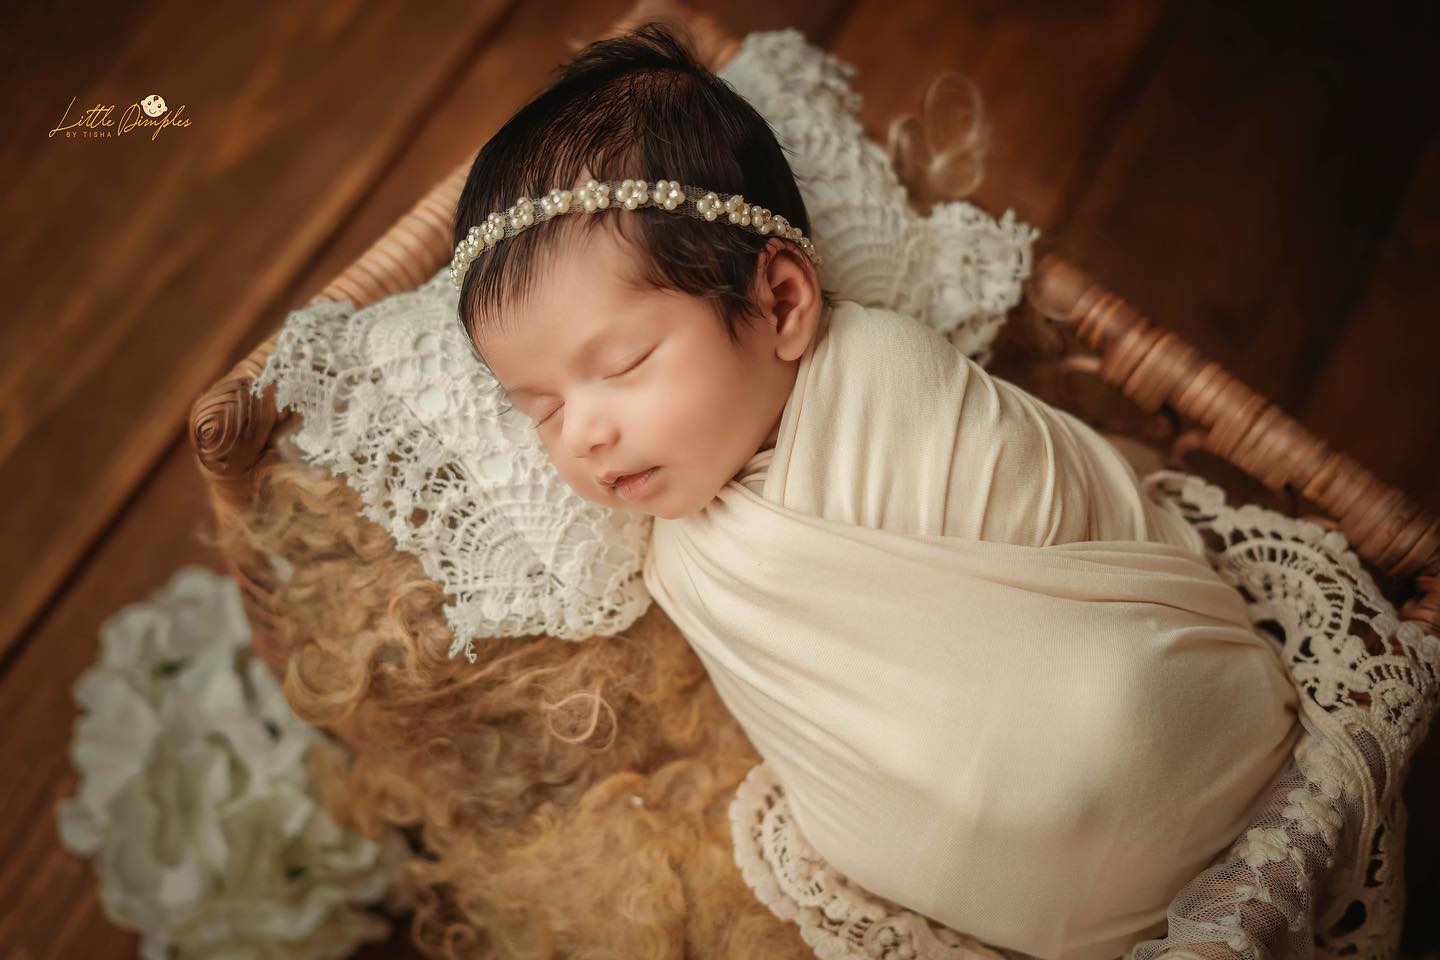 We specialize in elegant newborn photography and baby photography. If you are looking for Baby photographers Bangalore or newborn photoshoot in Bangalore, contact us now!